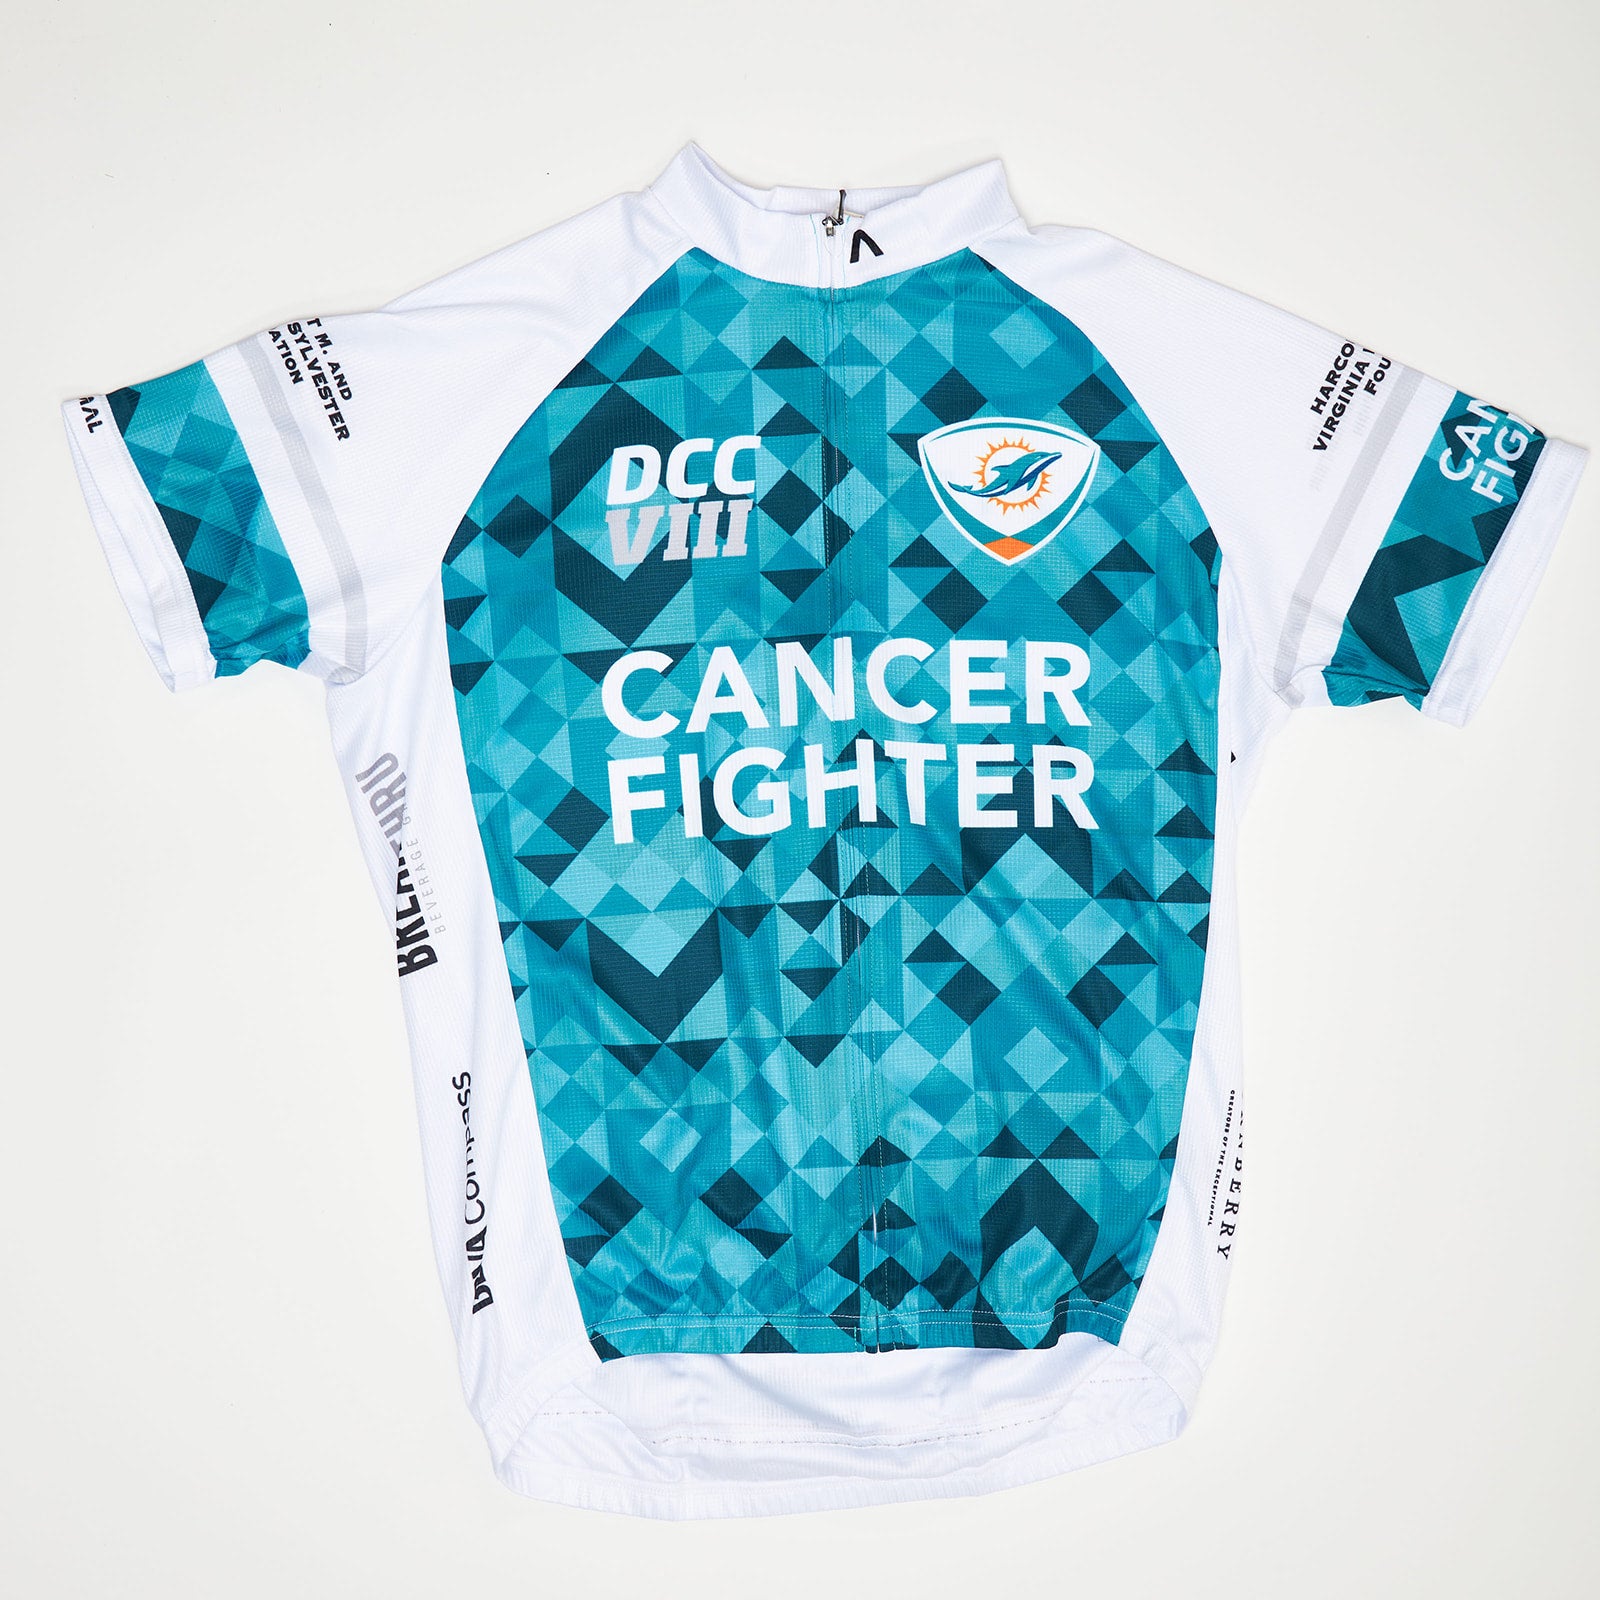 DCC VIII 2018 Women's Dolphins Cancer Challenge Cycling Jersey